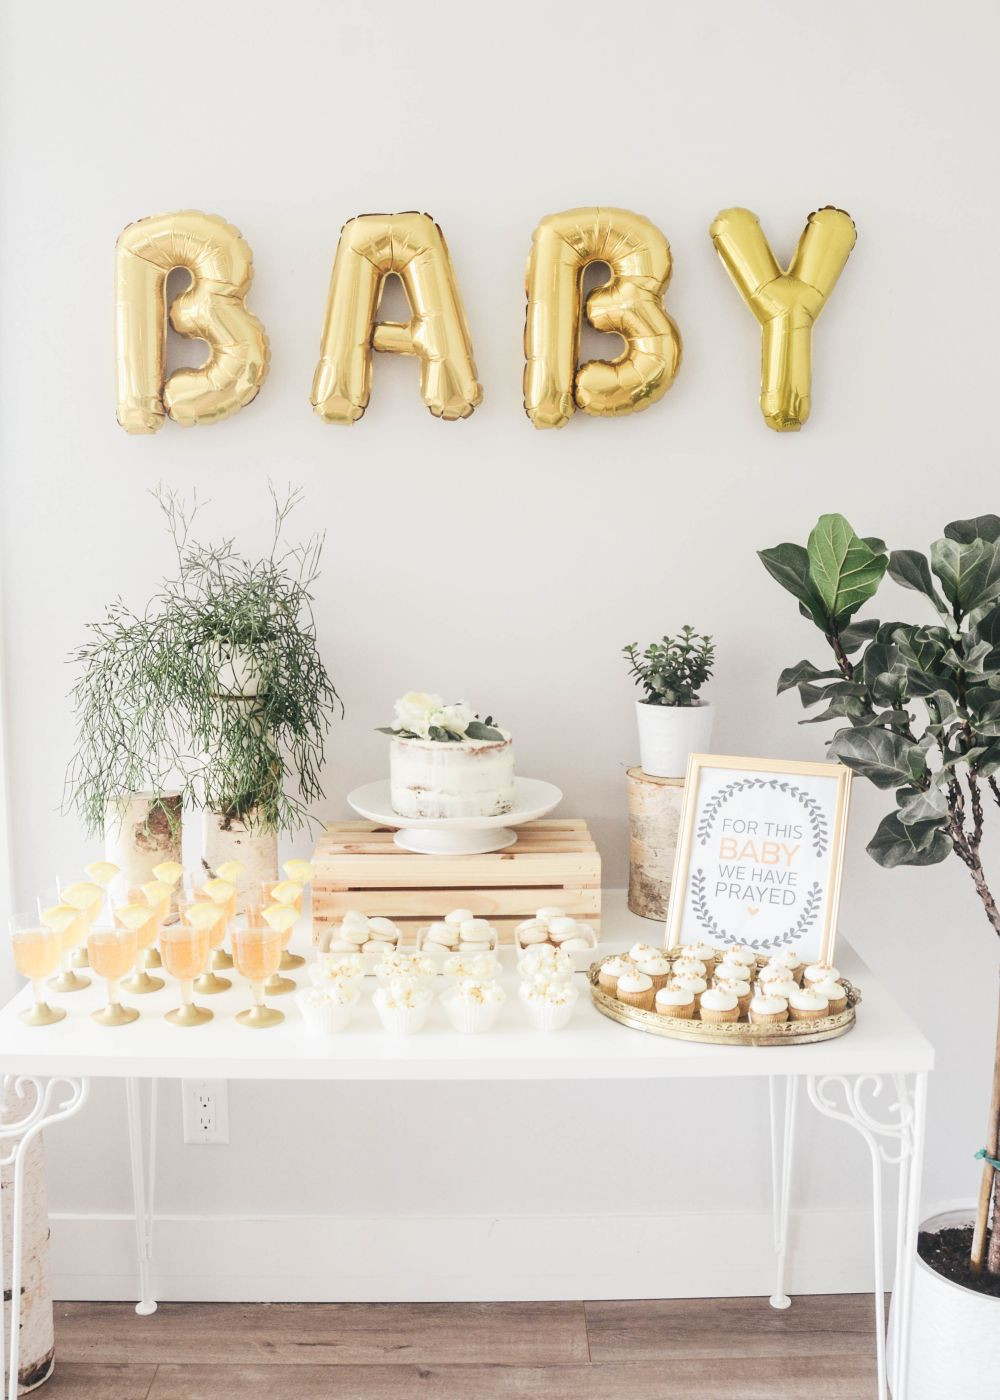 Baby Shower Room Decorations
 15 Best Baby Shower Décor Ideas for a Memorable Celebration